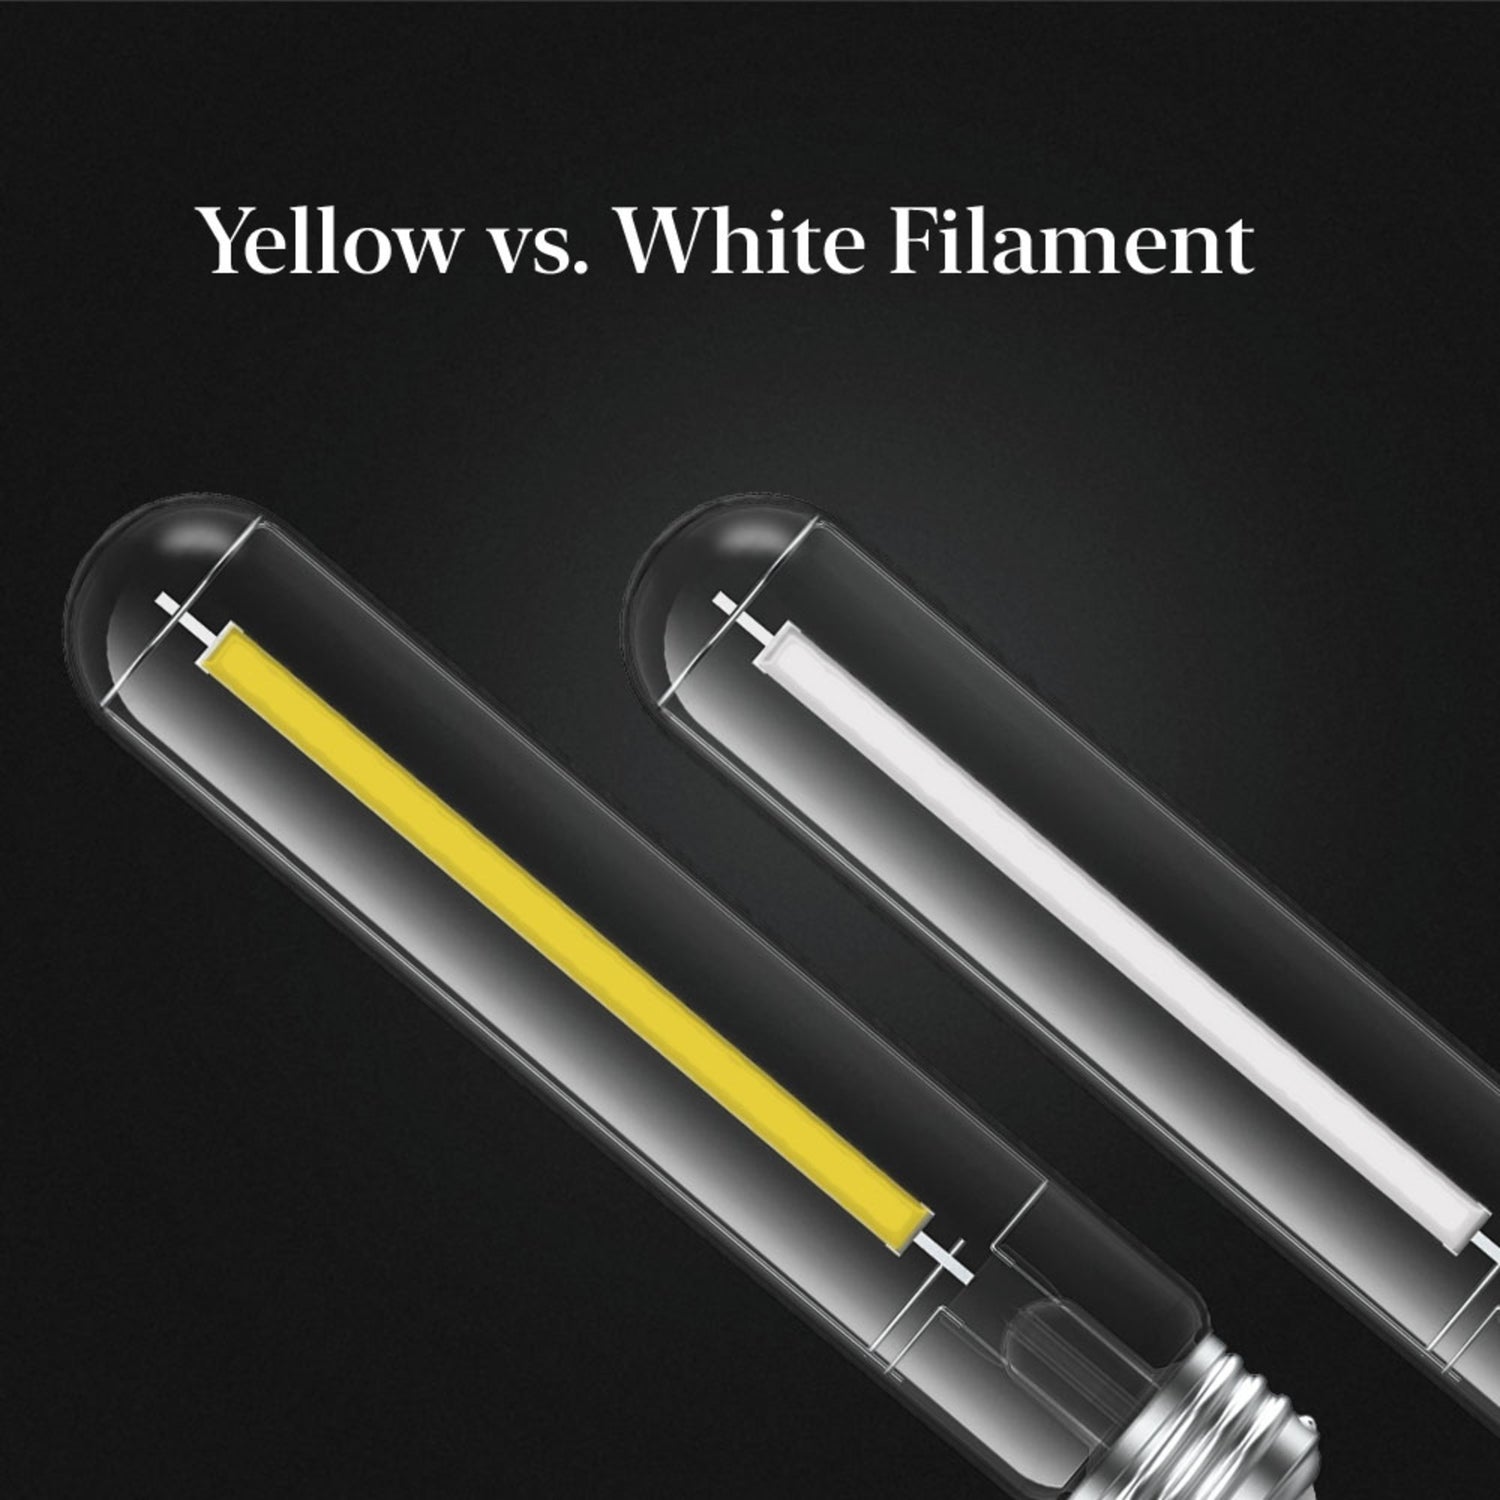 6.5W (60W Replacement) Warm Light (2100K) T10 (E26 Medium Base) Dimmable Exposed White Filament LED Light Bulb (4-Pack)